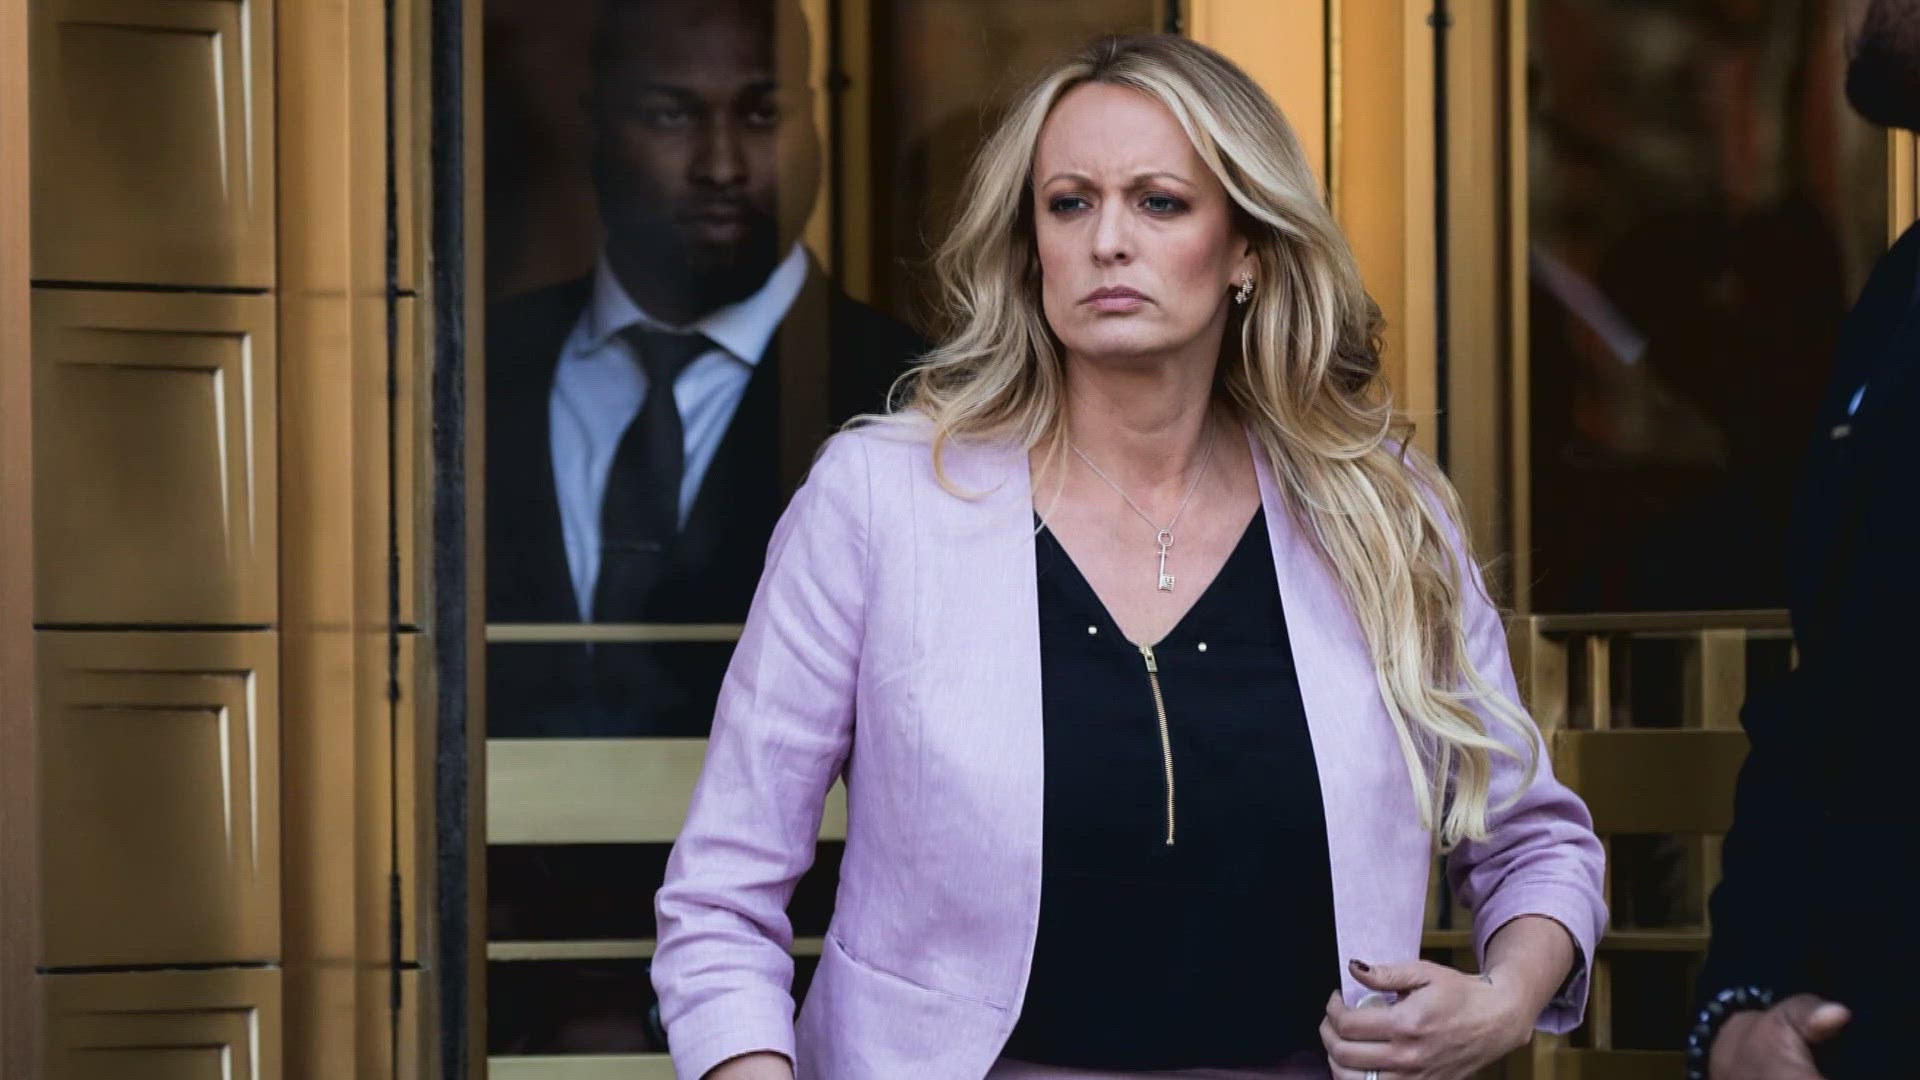 Adult film star Stormy Daniels described meeting the former president in his hotel in Lake Tahoe in 2006.